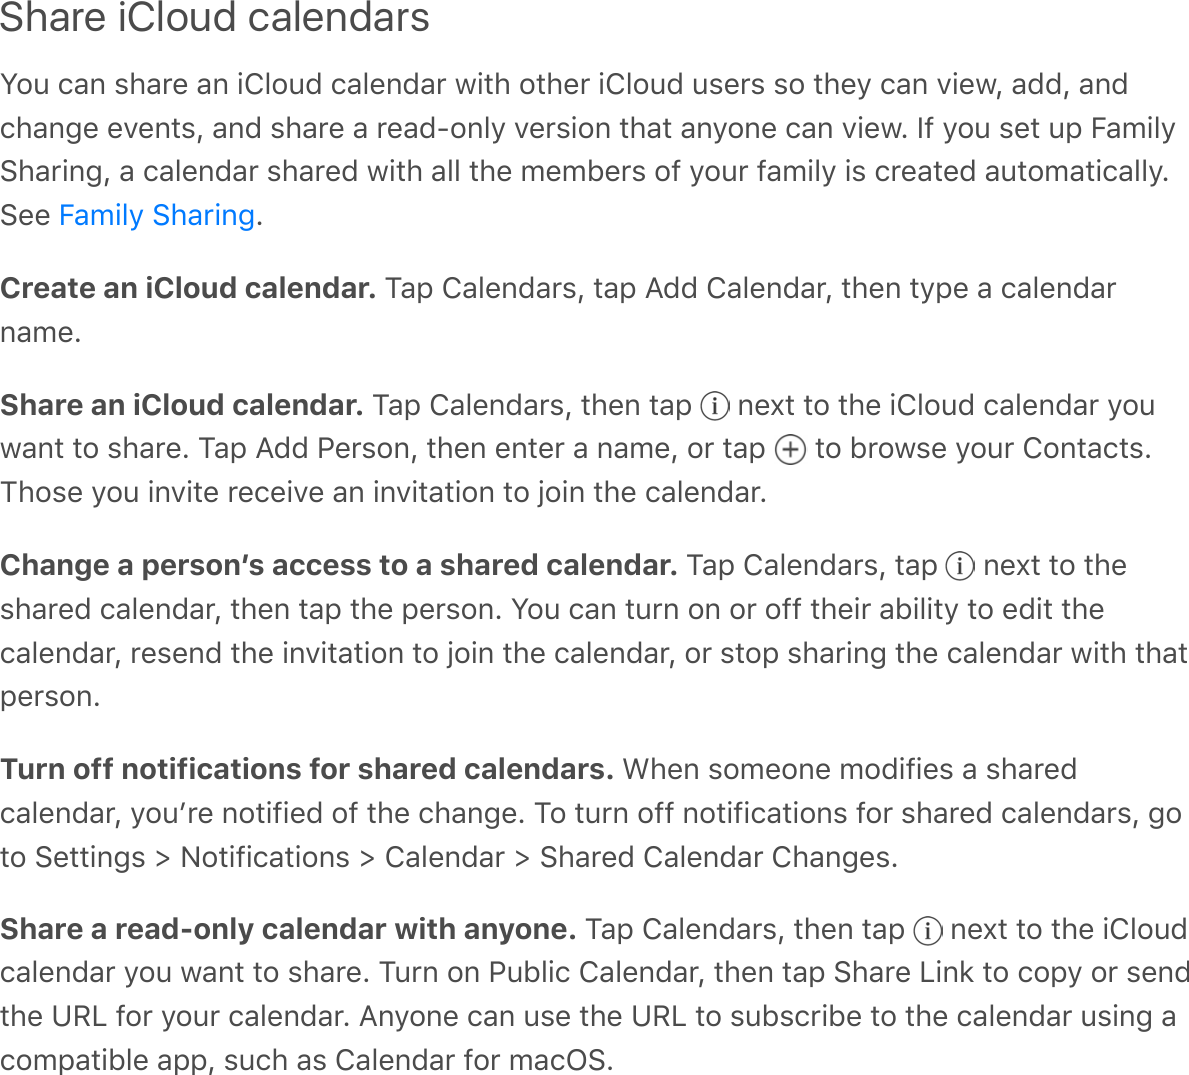 Share iCloud calendarsS$6&apos;/-%&apos;,#-0&amp;&apos;-%&apos;!T.$6C&apos;/-.&amp;%C-0&apos;3!*#&apos;$*#&amp;0&apos;!T.$6C&apos;6,&amp;0,&apos;,$&apos;*#&amp;&gt;&apos;/-%&apos;A!&amp;3Q&apos;-CCQ&apos;-%C/#-%4&amp;&apos;&amp;A&amp;%*,Q&apos;-%C&apos;,#-0&amp;&apos;-&apos;0&amp;-C8$%.&gt;&apos;A&amp;0,!$%&apos;*#-*&apos;-%&gt;$%&amp;&apos;/-%&apos;A!&amp;3G&apos;)7&apos;&gt;$6&apos;,&amp;*&apos;6;&apos;5-9!.&gt;:#-0!%4Q&apos;-&apos;/-.&amp;%C-0&apos;,#-0&amp;C&apos;3!*#&apos;-..&apos;*#&amp;&apos;9&amp;9F&amp;0,&apos;$7&apos;&gt;$60&apos;7-9!.&gt;&apos;!,&apos;/0&amp;-*&amp;C&apos;-6*$9-*!/-..&gt;G:&amp;&amp;&apos; GCreate an iCloud calendar. ?-;&apos;T-.&amp;%C-0,Q&apos;*-;&apos;BCC&apos;T-.&amp;%C-0Q&apos;*#&amp;%&apos;*&gt;;&amp;&apos;-&apos;/-.&amp;%C-0%-9&amp;GShare an iCloud calendar. ?-;&apos;T-.&amp;%C-0,Q&apos;*#&amp;%&apos;*-;&apos; &apos;%&amp;^*&apos;*$&apos;*#&amp;&apos;!T.$6C&apos;/-.&amp;%C-0&apos;&gt;$63-%*&apos;*$&apos;,#-0&amp;G&apos;?-;&apos;BCC&apos;&quot;&amp;0,$%Q&apos;*#&amp;%&apos;&amp;%*&amp;0&apos;-&apos;%-9&amp;Q&apos;$0&apos;*-;&apos; &apos;*$&apos;F0$3,&amp;&apos;&gt;$60&apos;T$%*-/*,G?#$,&amp;&apos;&gt;$6&apos;!%A!*&amp;&apos;0&amp;/&amp;!A&amp;&apos;-%&apos;!%A!*-*!$%&apos;*$&apos;_$!%&apos;*#&amp;&apos;/-.&amp;%C-0GChange a personʼs access to a shared calendar. ?-;&apos;T-.&amp;%C-0,Q&apos;*-;&apos; &apos;%&amp;^*&apos;*$&apos;*#&amp;,#-0&amp;C&apos;/-.&amp;%C-0Q&apos;*#&amp;%&apos;*-;&apos;*#&amp;&apos;;&amp;0,$%G&apos;S$6&apos;/-%&apos;*60%&apos;$%&apos;$0&apos;$77&apos;*#&amp;!0&apos;-F!.!*&gt;&apos;*$&apos;&amp;C!*&apos;*#&amp;/-.&amp;%C-0Q&apos;0&amp;,&amp;%C&apos;*#&amp;&apos;!%A!*-*!$%&apos;*$&apos;_$!%&apos;*#&amp;&apos;/-.&amp;%C-0Q&apos;$0&apos;,*$;&apos;,#-0!%4&apos;*#&amp;&apos;/-.&amp;%C-0&apos;3!*#&apos;*#-*;&amp;0,$%GTurn off notifications for shared calendars. L#&amp;%&apos;,$9&amp;$%&amp;&apos;9$C!7!&amp;,&apos;-&apos;,#-0&amp;C/-.&amp;%C-0Q&apos;&gt;$6+0&amp;&apos;%$*!7!&amp;C&apos;$7&apos;*#&amp;&apos;/#-%4&amp;G&apos;?$&apos;*60%&apos;$77&apos;%$*!7!/-*!$%,&apos;7$0&apos;,#-0&amp;C&apos;/-.&amp;%C-0,Q&apos;4$*$&apos;:&amp;**!%4,&apos;e&apos;E$*!7!/-*!$%,&apos;e&apos;T-.&amp;%C-0&apos;e&apos;:#-0&amp;C&apos;T-.&amp;%C-0&apos;T#-%4&amp;,GShare a read-only calendar with anyone. ?-;&apos;T-.&amp;%C-0,Q&apos;*#&amp;%&apos;*-;&apos; &apos;%&amp;^*&apos;*$&apos;*#&amp;&apos;!T.$6C/-.&amp;%C-0&apos;&gt;$6&apos;3-%*&apos;*$&apos;,#-0&amp;G&apos;?60%&apos;$%&apos;&quot;6F.!/&apos;T-.&amp;%C-0Q&apos;*#&amp;%&apos;*-;&apos;:#-0&amp;&apos;D!%2&apos;*$&apos;/$;&gt;&apos;$0&apos;,&amp;%C*#&amp;&apos;1ID&apos;7$0&apos;&gt;$60&apos;/-.&amp;%C-0G&apos;B%&gt;$%&amp;&apos;/-%&apos;6,&amp;&apos;*#&amp;&apos;1ID&apos;*$&apos;,6F,/0!F&amp;&apos;*$&apos;*#&amp;&apos;/-.&amp;%C-0&apos;6,!%4&apos;-/$9;-*!F.&amp;&apos;-;;Q&apos;,6/#&apos;-,&apos;T-.&amp;%C-0&apos;7$0&apos;9-/N:G5-9!.&gt;&apos;:#-0!%4